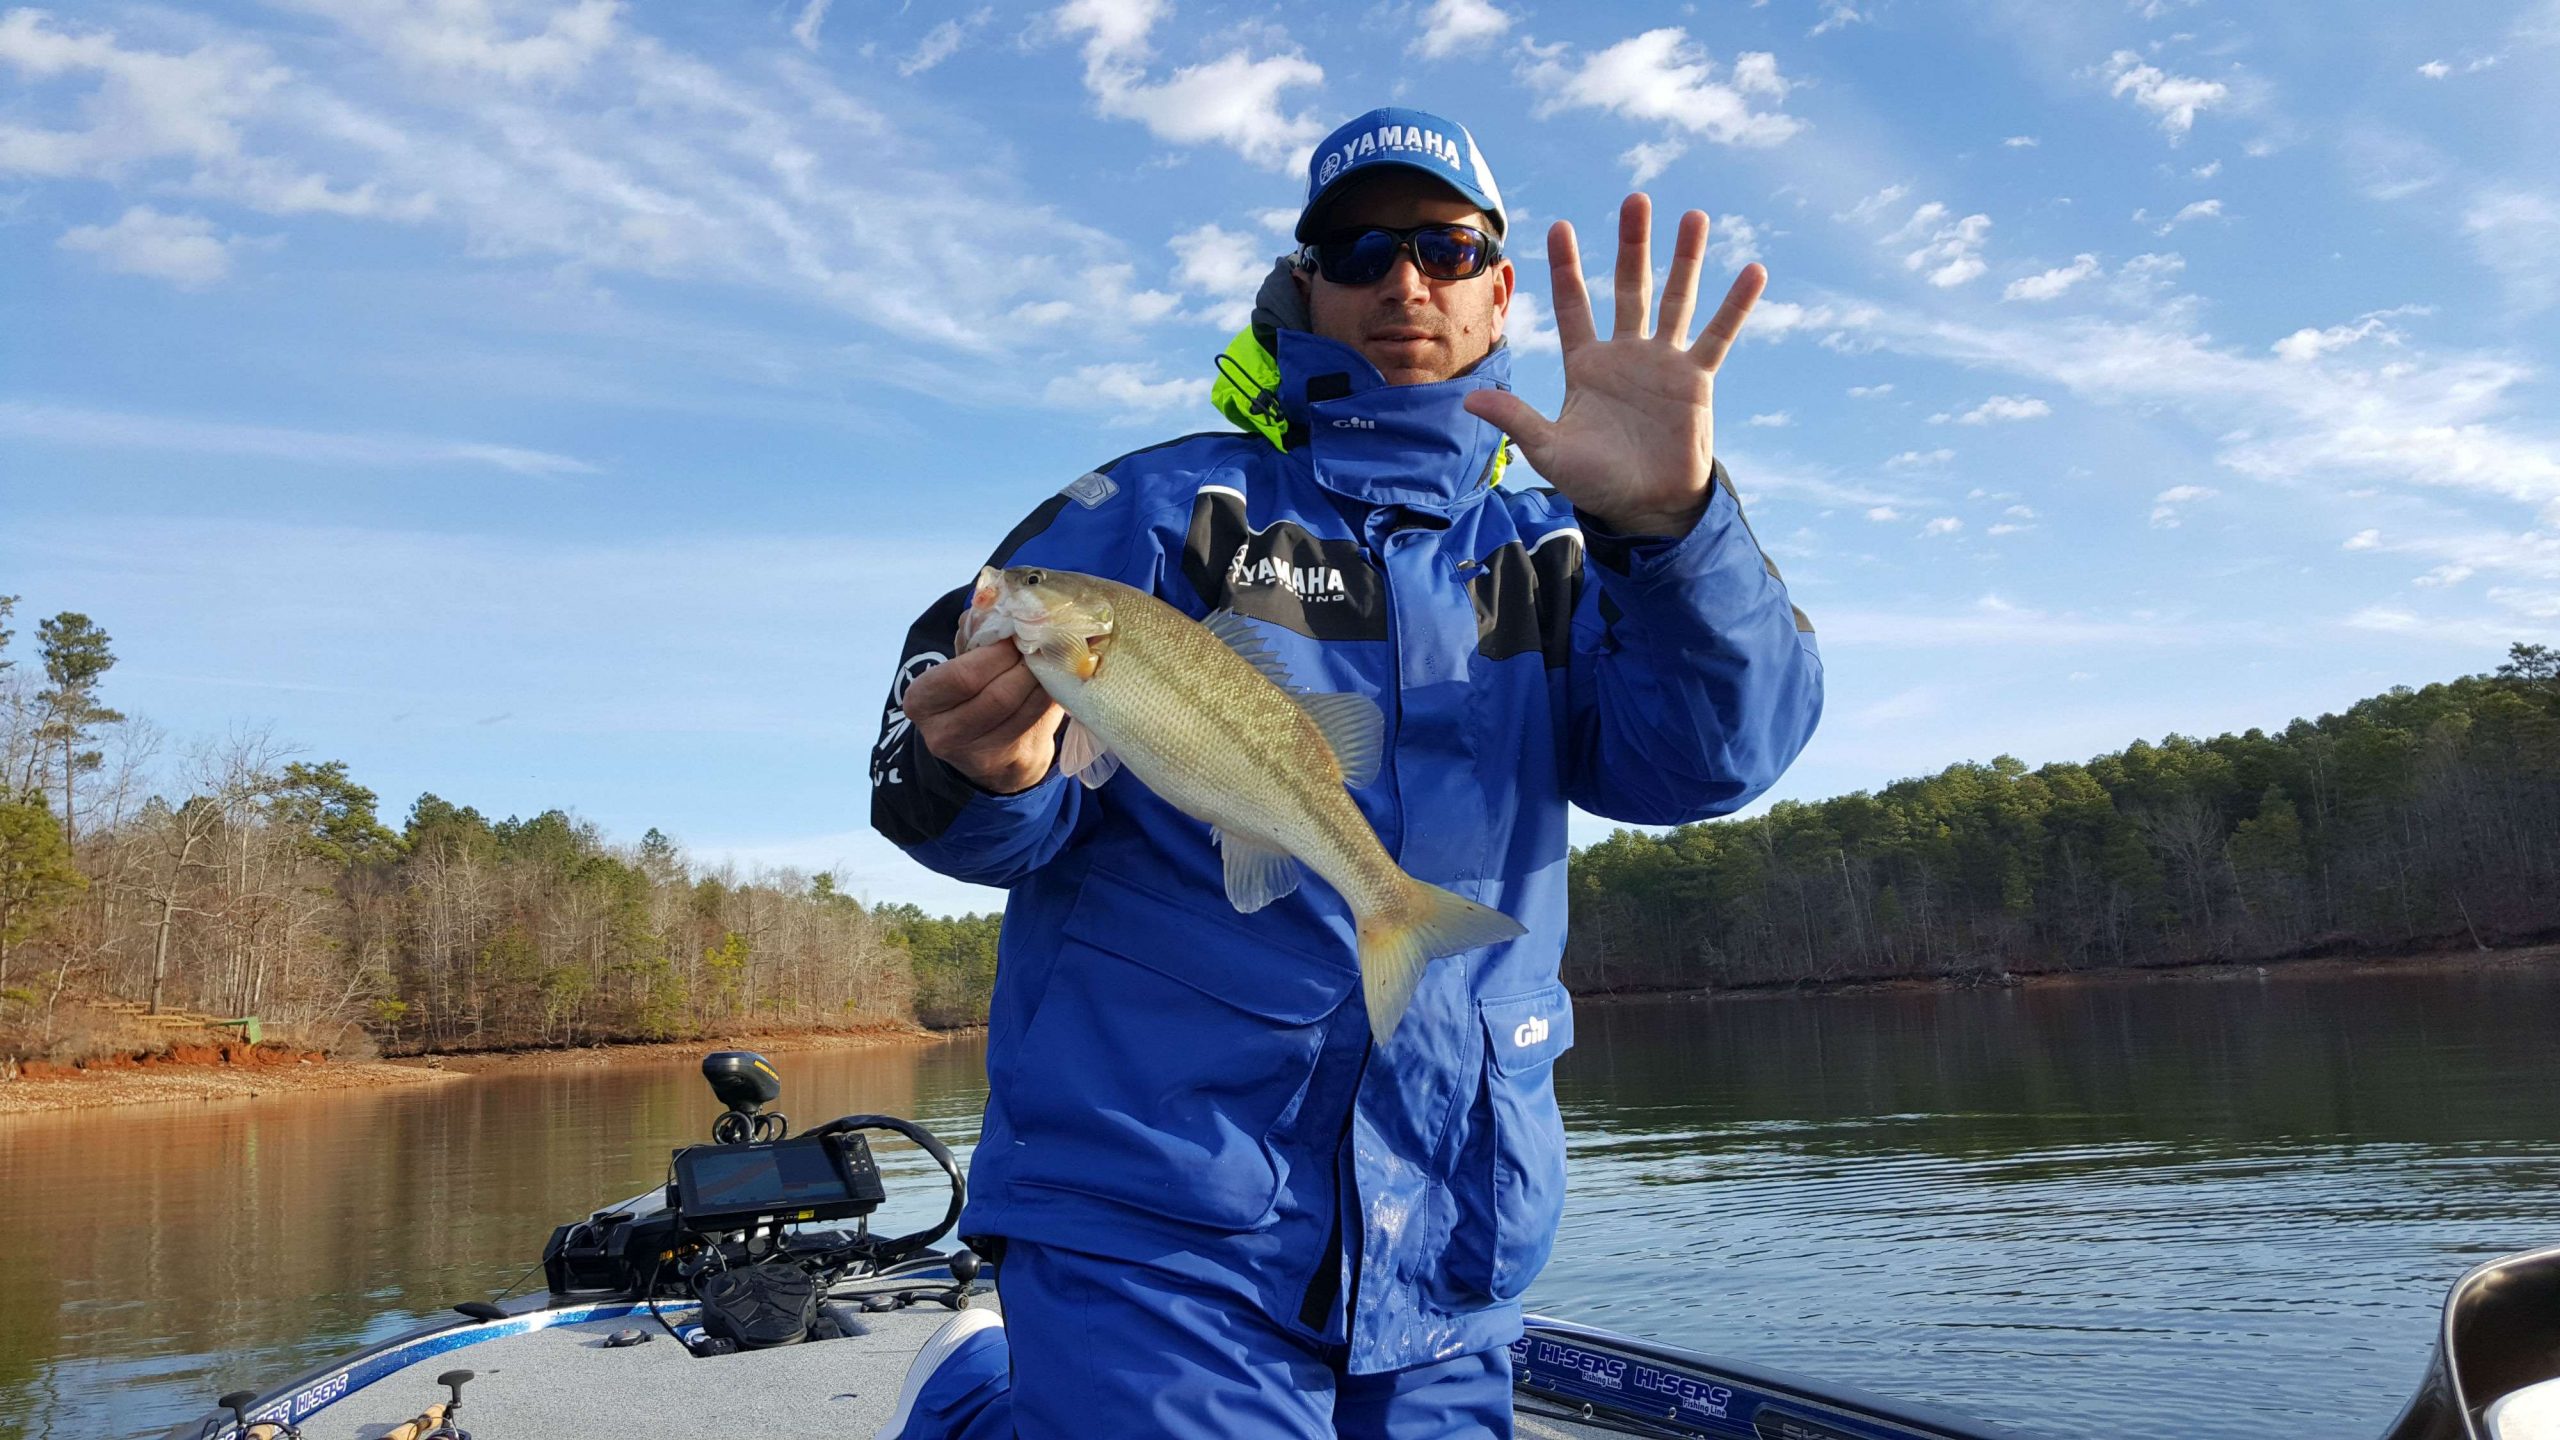 Cliff Pace now has a limit with his third fish in a row. 

